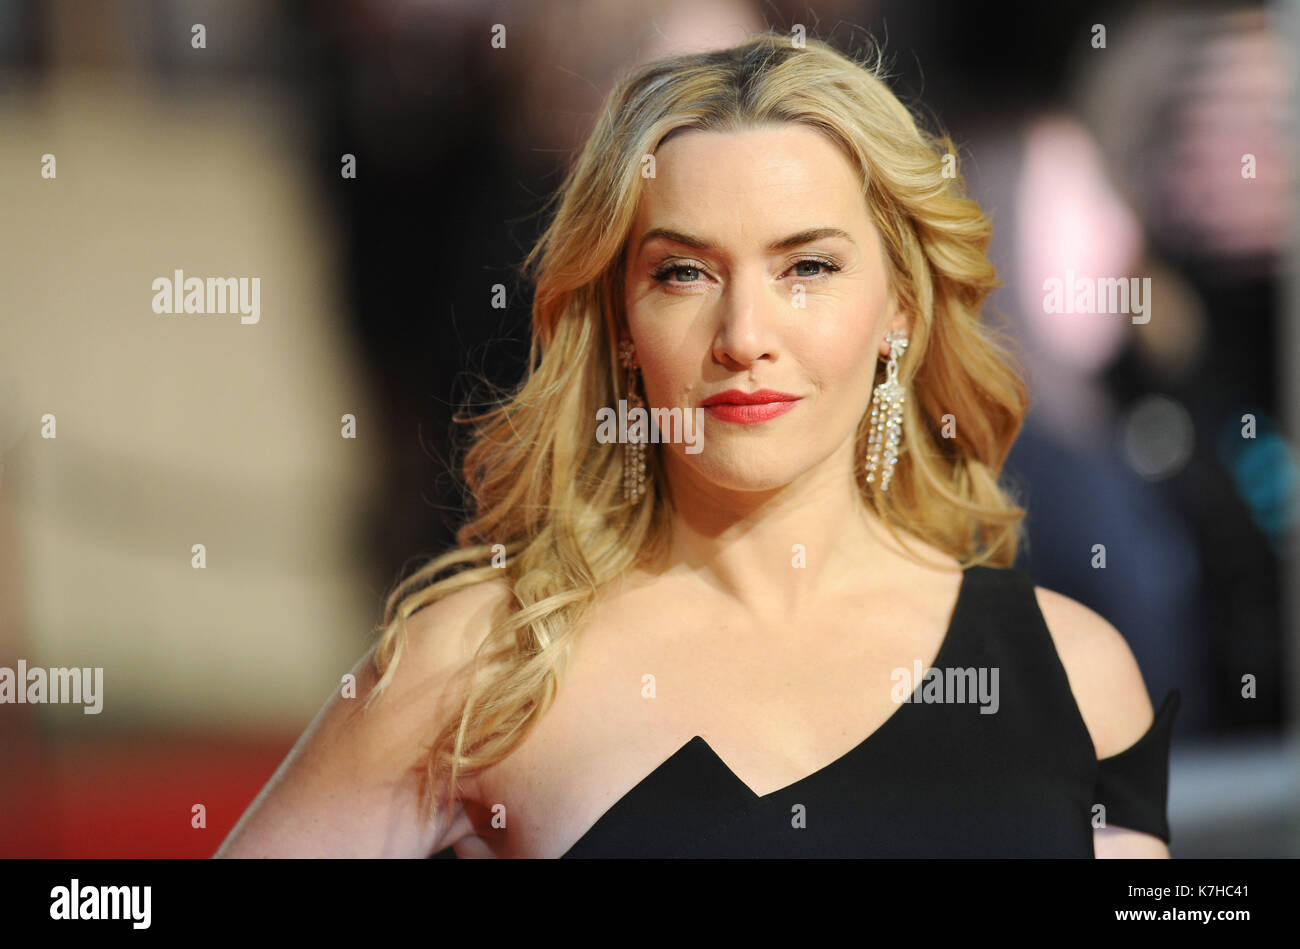 Photo Must Be Credited ©Kate Green/Alpha Press 079965 14/02/2016 Kate Winslet at the EE Bafta British Academy Film Awards Arrivals at at the Royal Opera House in London Stock Photo